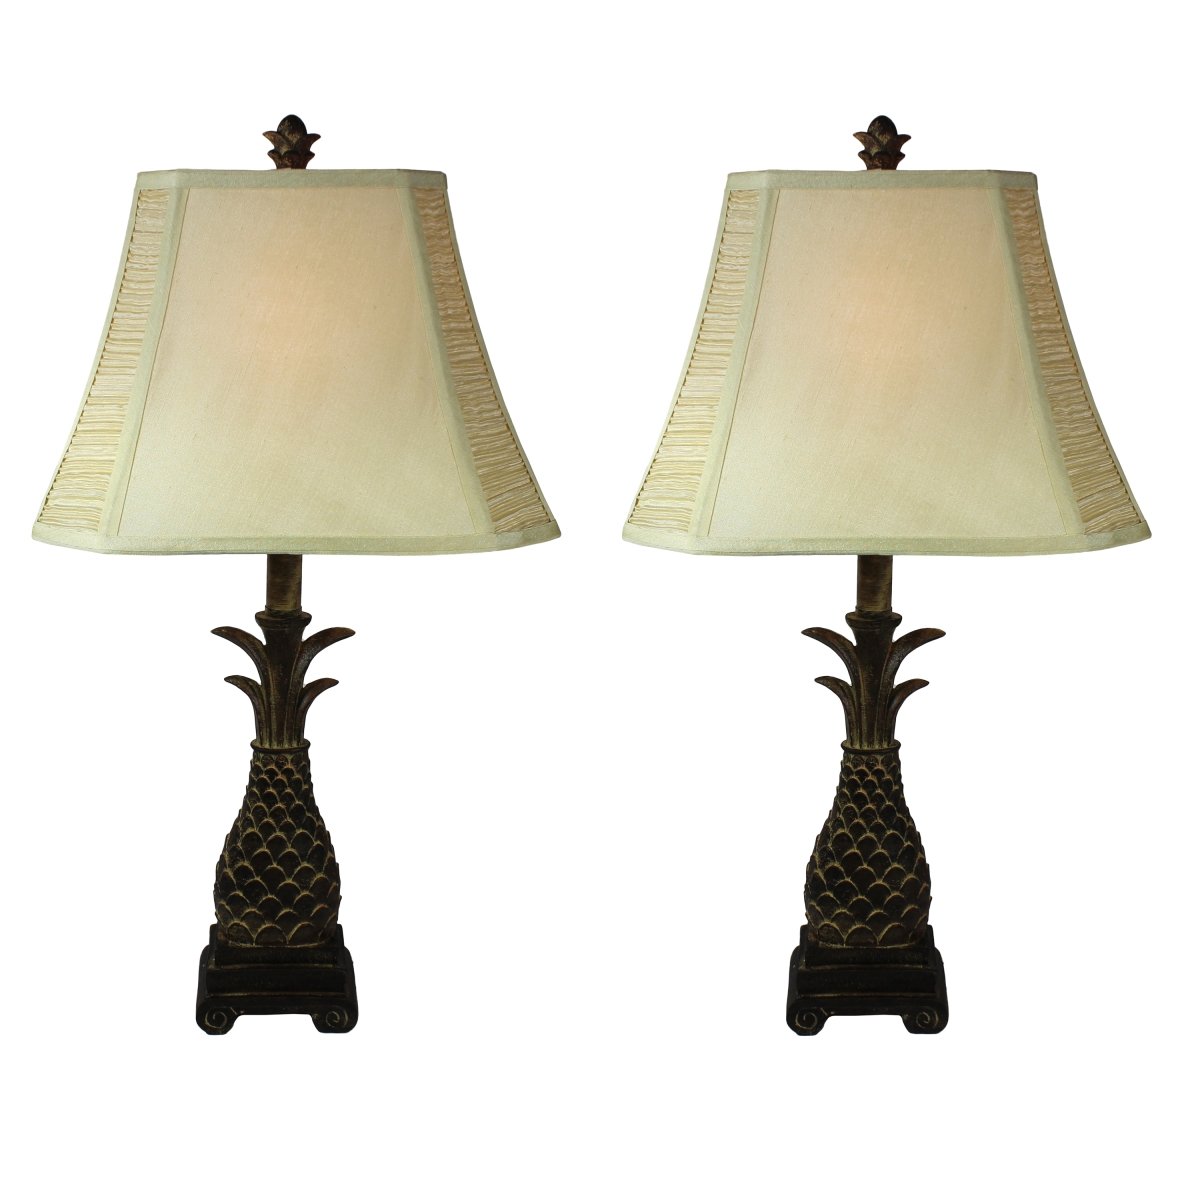 Urban Designs 7727072 Tropical Pineapple Accent Table Lamp - Set Of 2